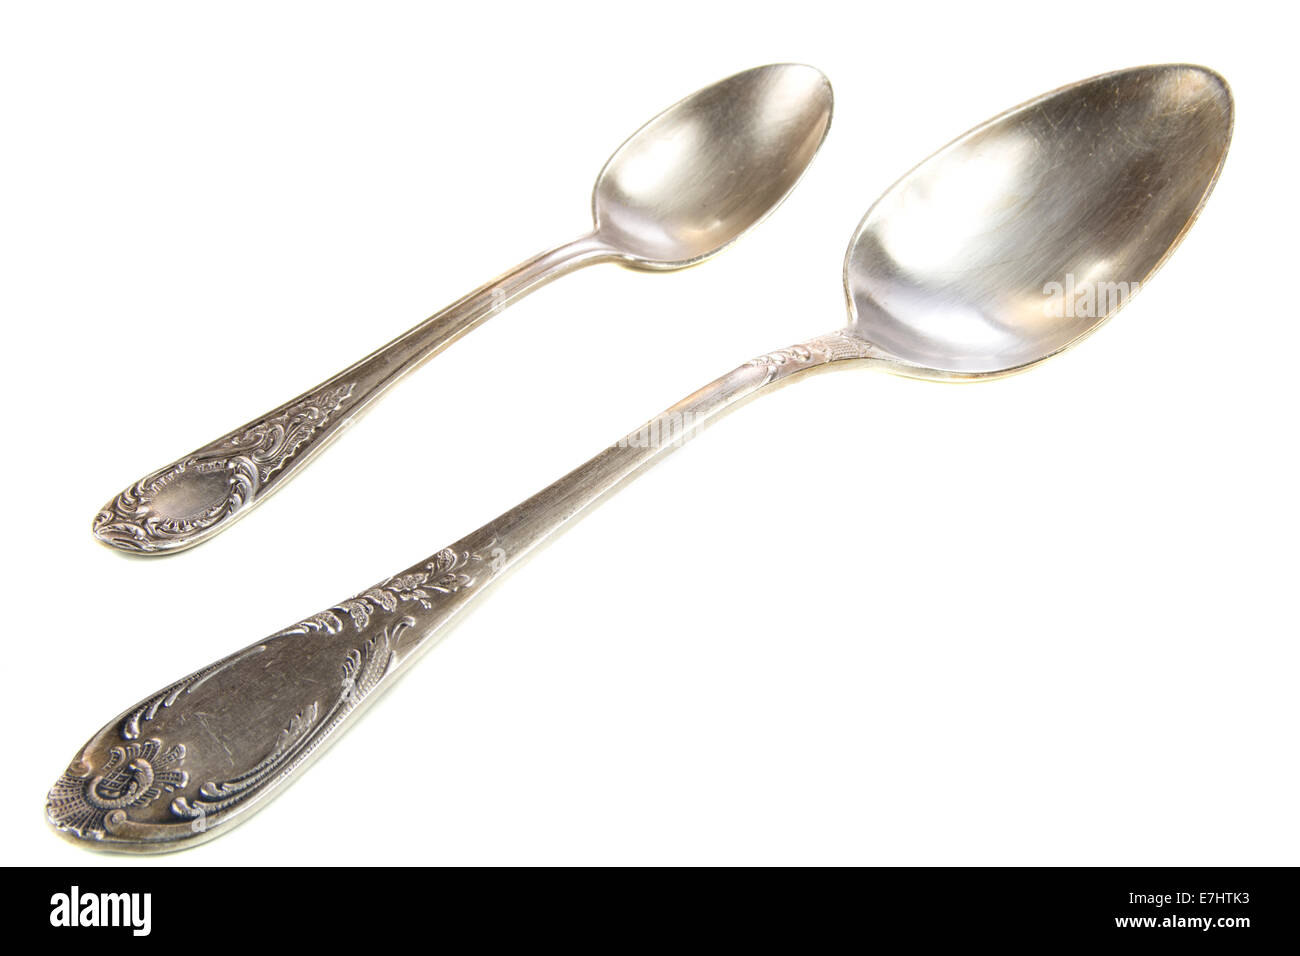 Pair of old silver spoons isolated on white background Stock Photo